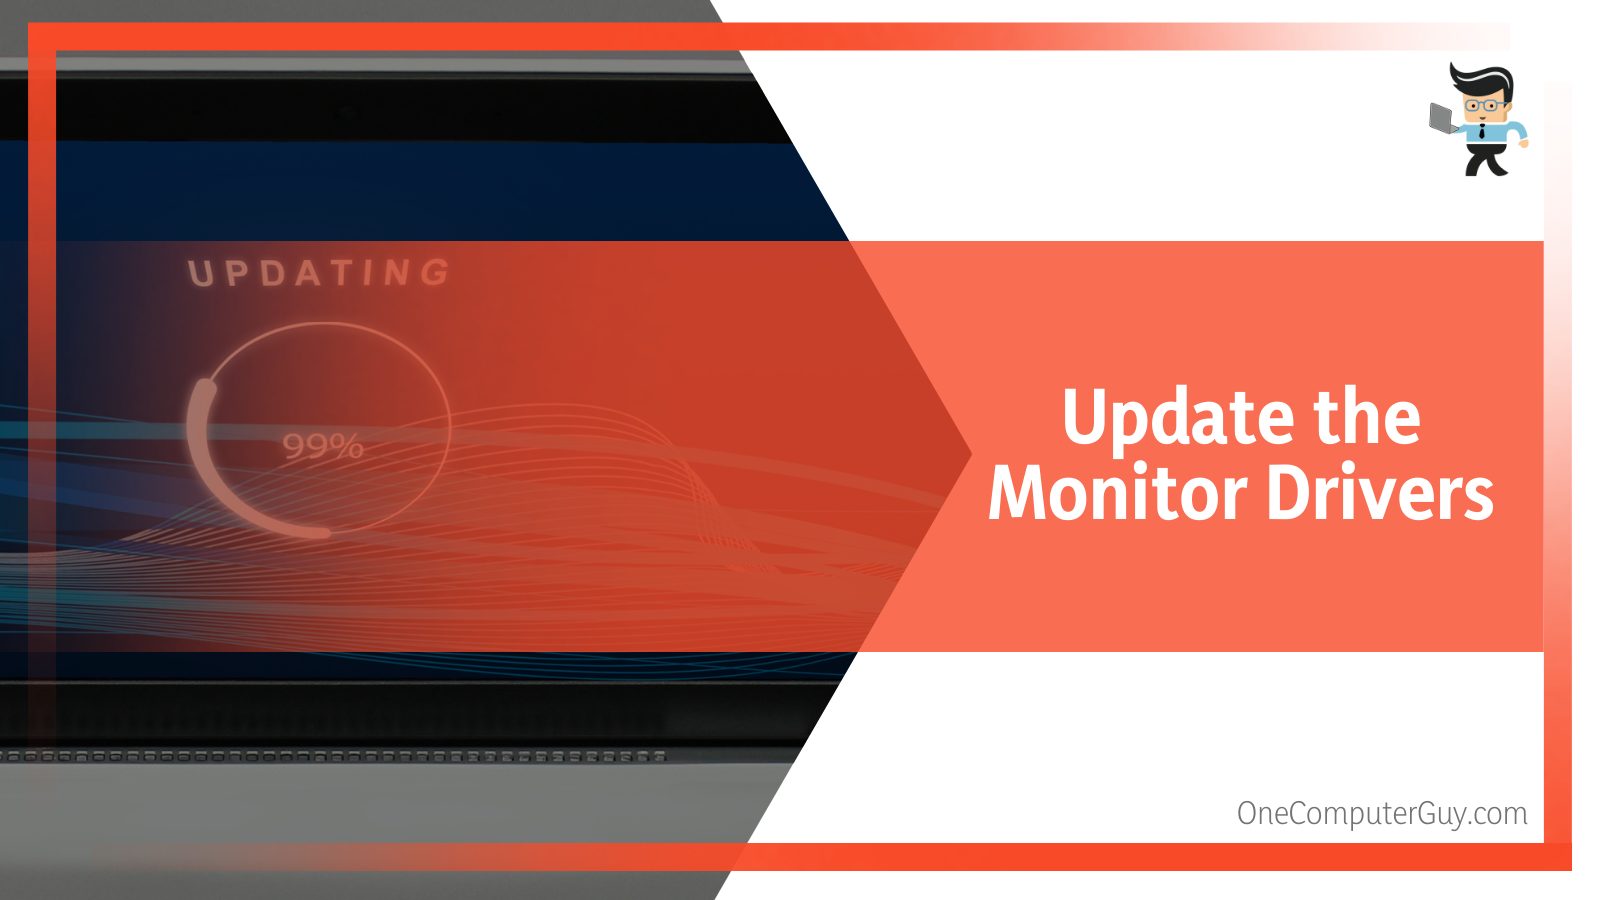 Update the Monitor Drivers